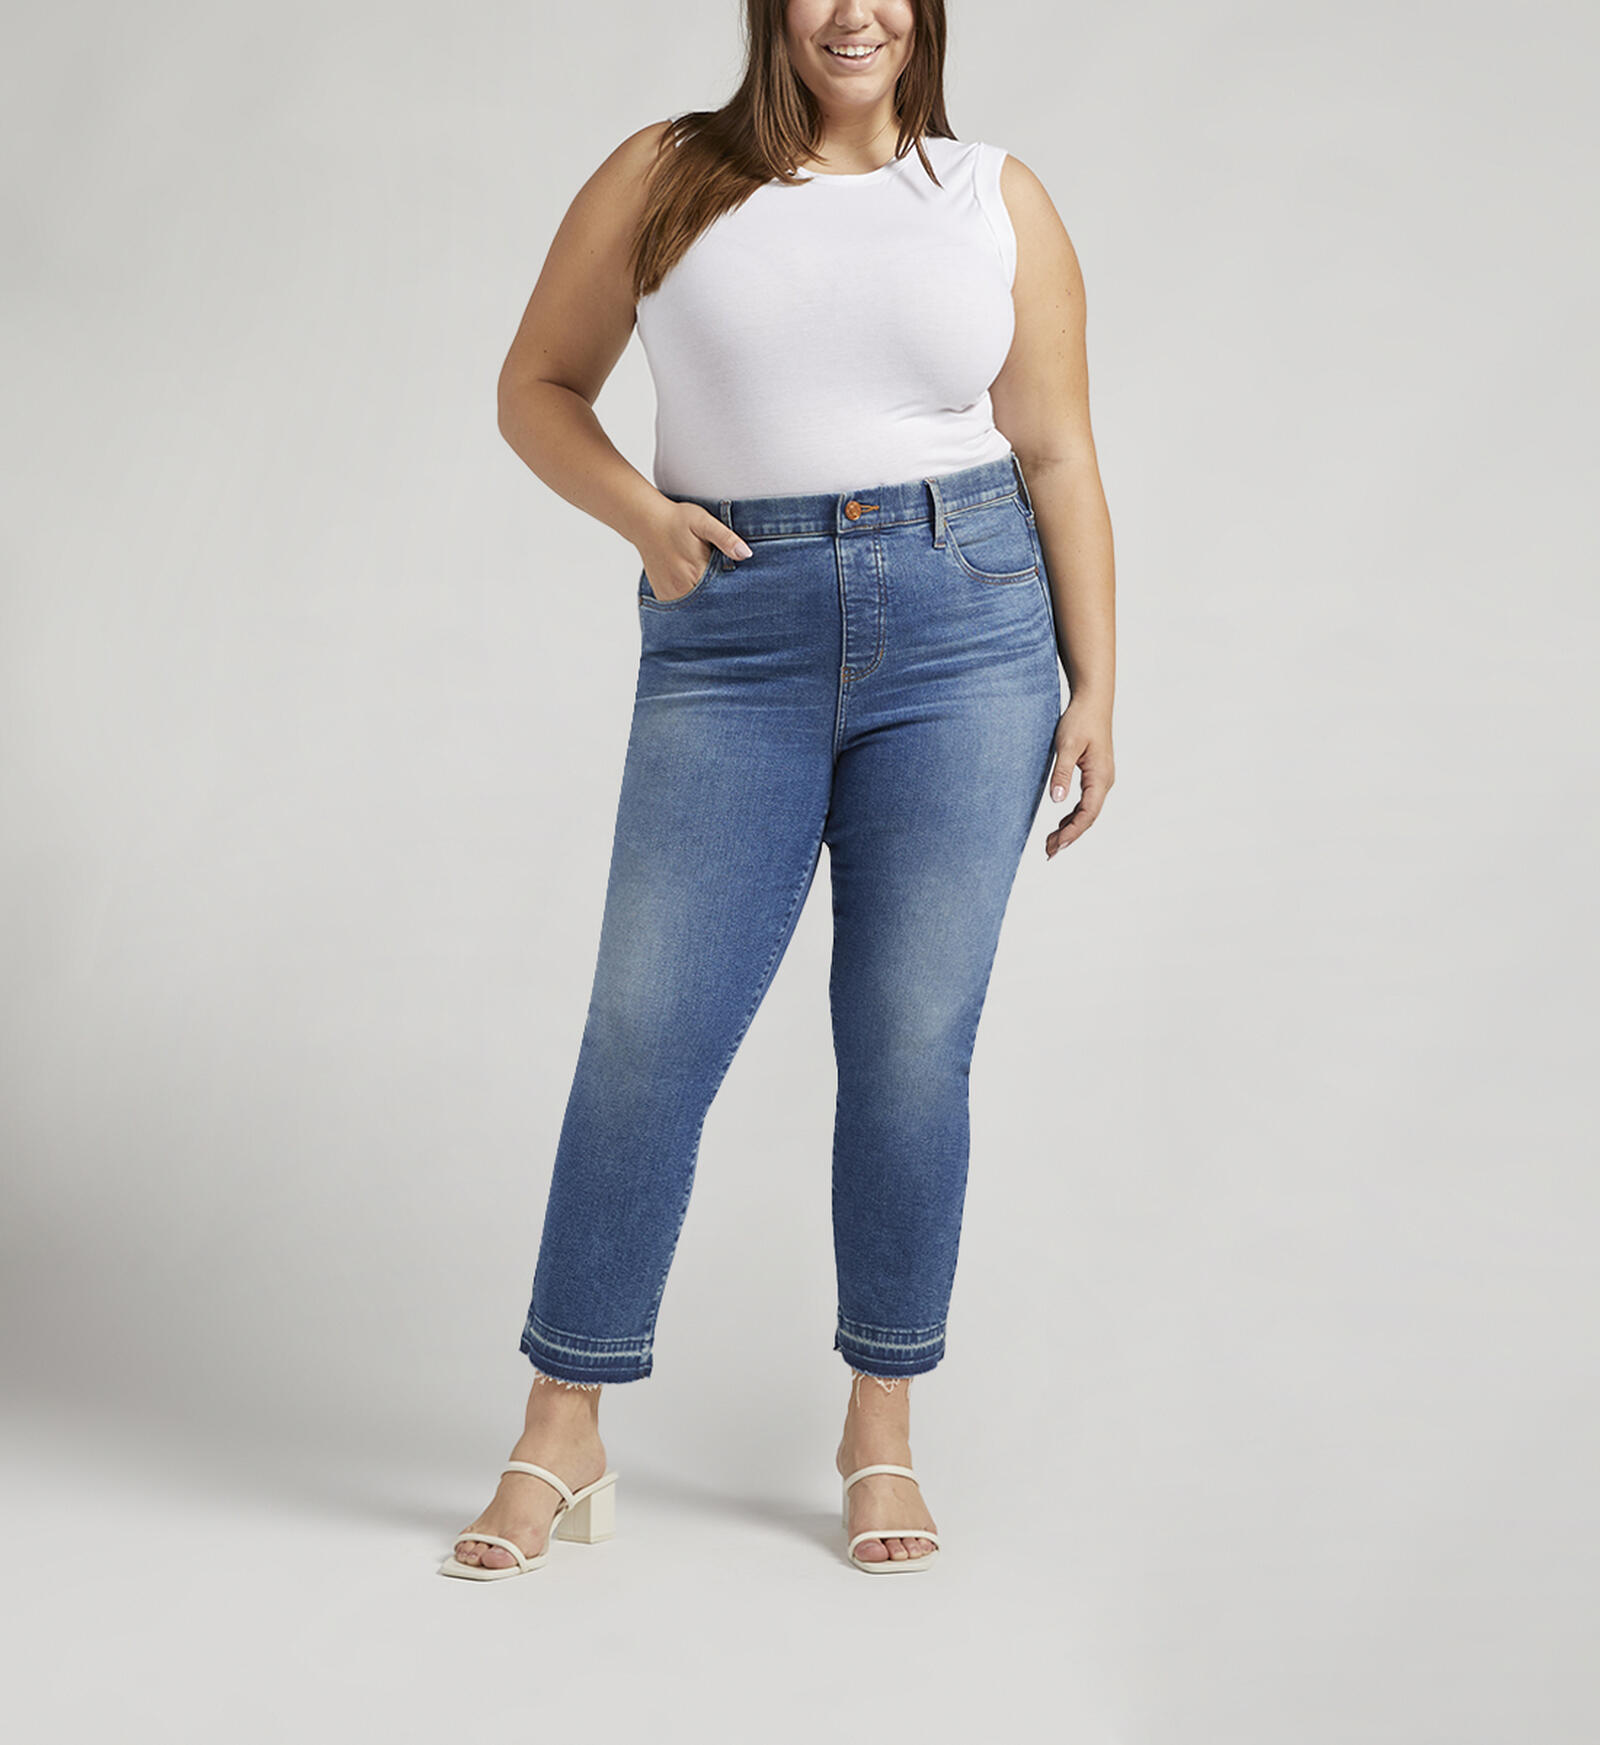 Buy Valentina High Rise Straight Cropped Jeans Plus Size for USD